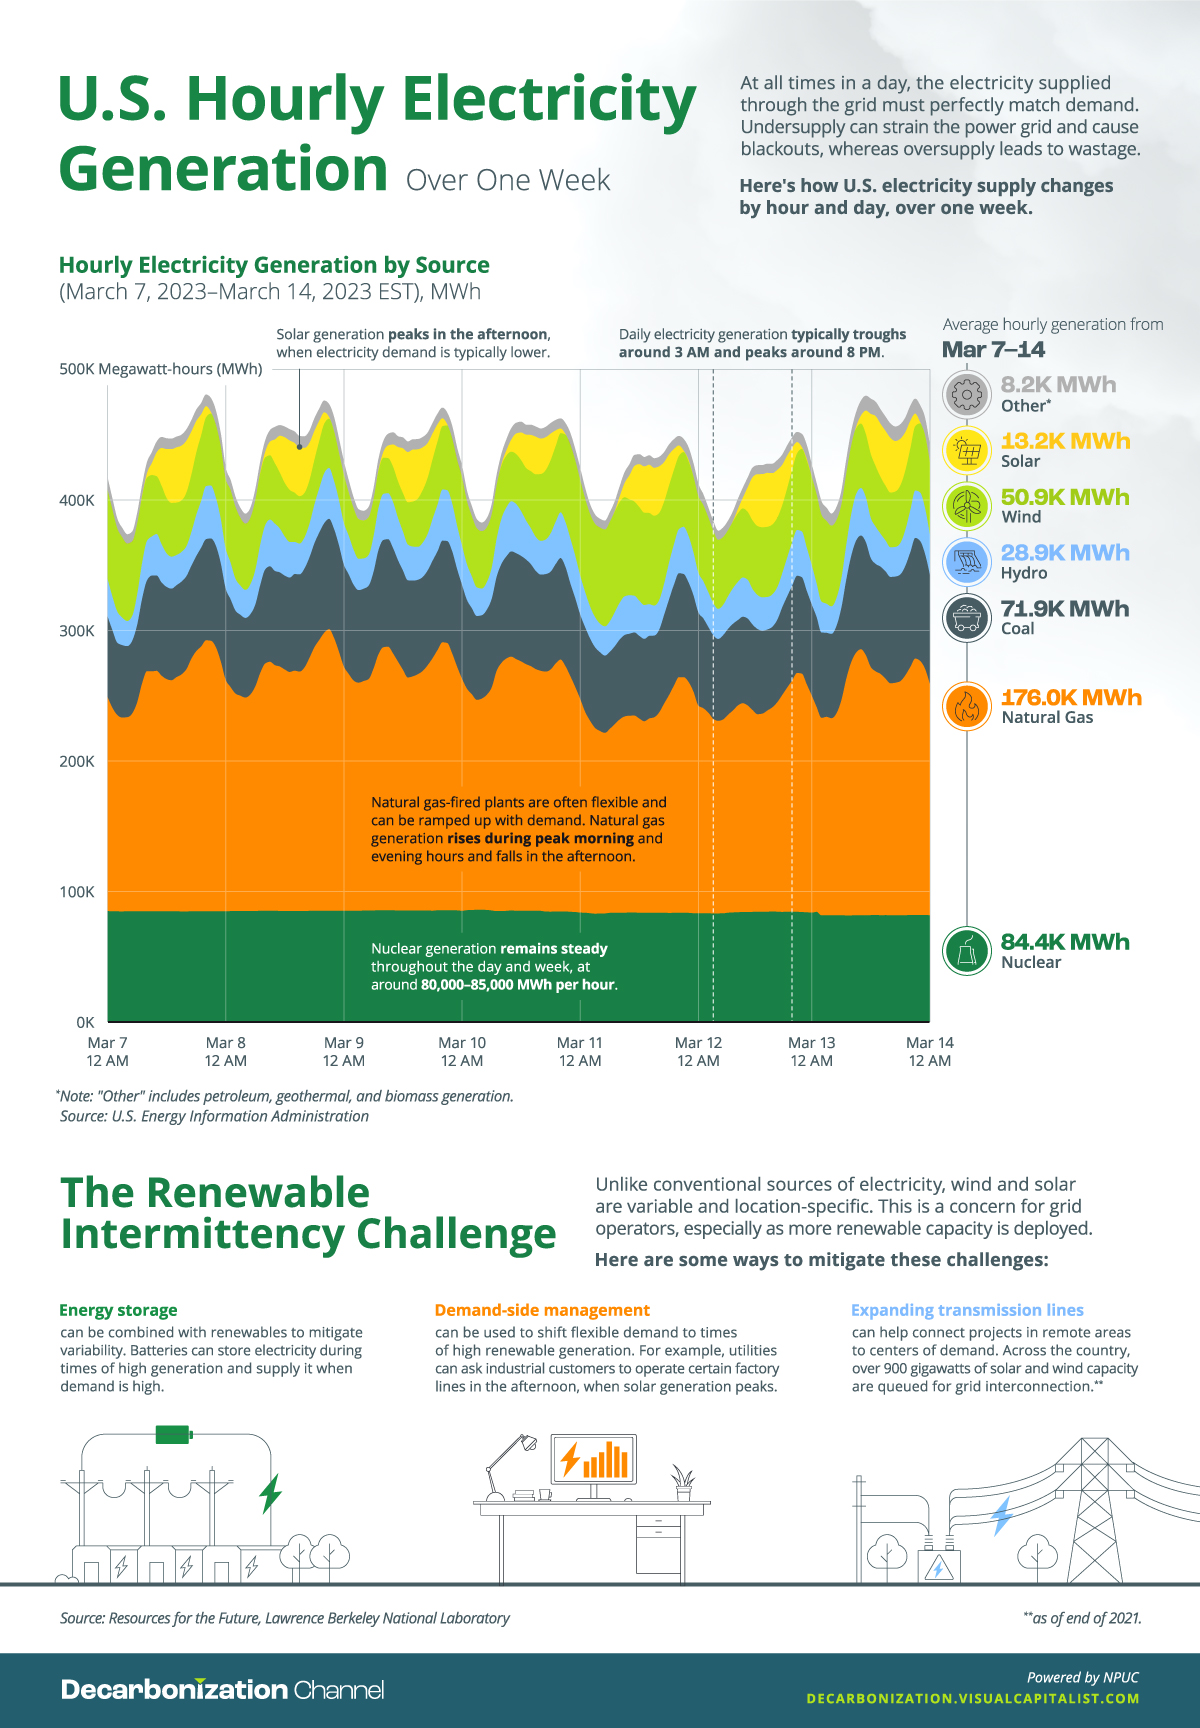 https://www.visualcapitalist.com/wp-content/uploads/2023/03/U.S.-hourly-electricity-generation-by-source-over-one-week-infographic-VC.jpg